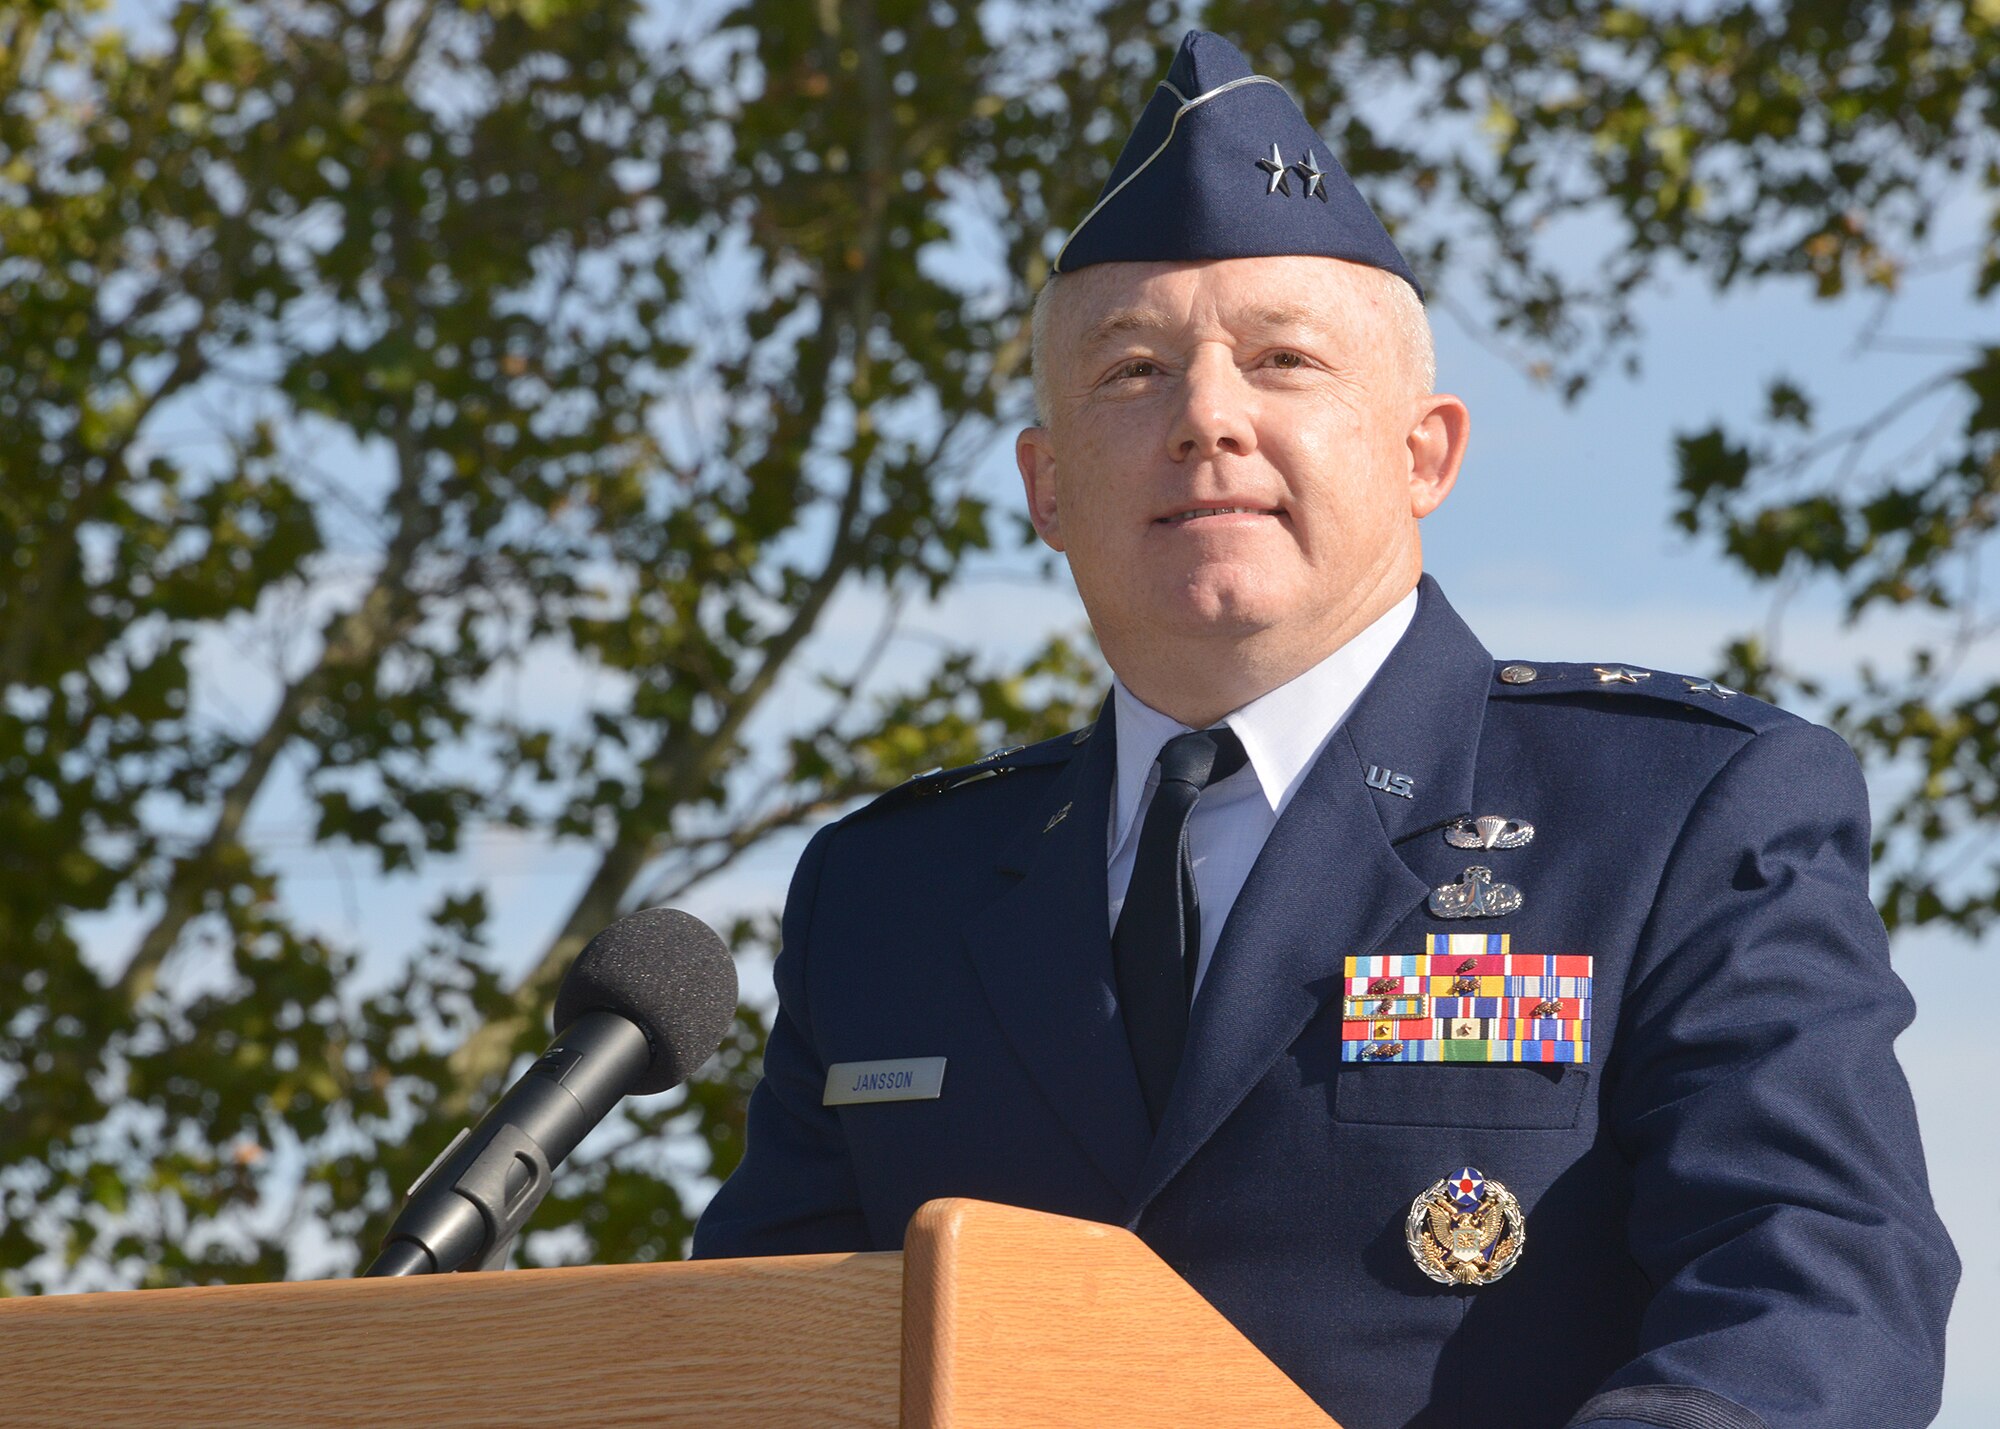 Maj. Gen. Scott Jansson, speaks to an audience after taking command of the Air Force Nuclear Weapons Center during a change of command ceremony Oct. 1 at Hardin Field. (Photo by Dennis Carlson)
